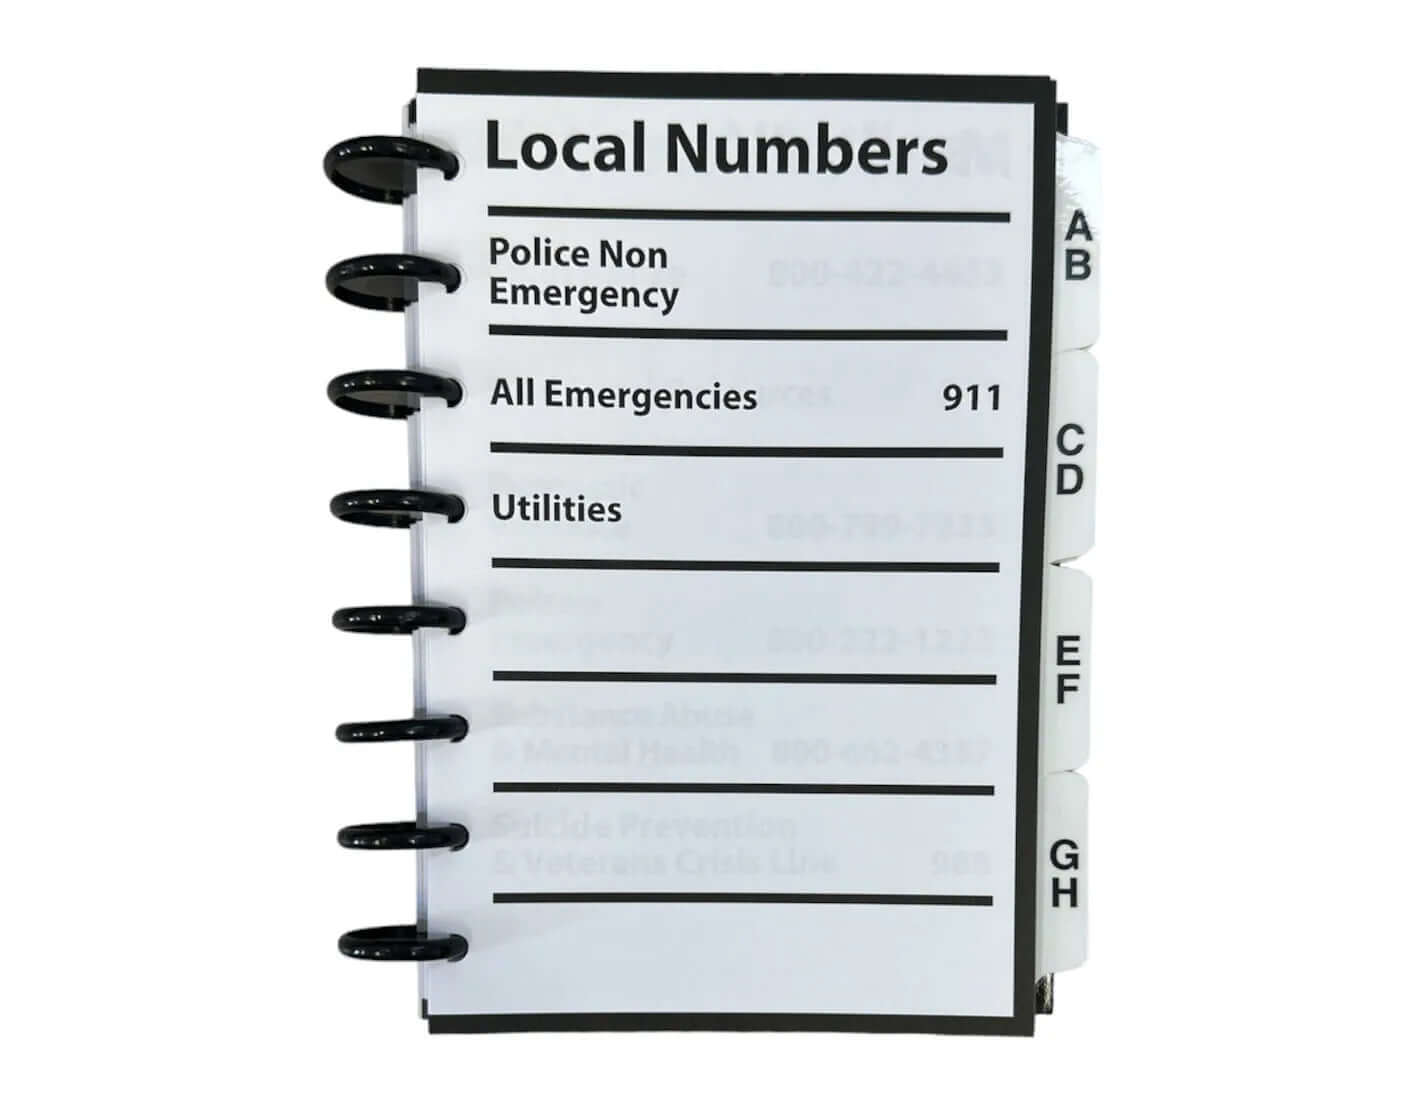 The front of the 2-sided local numbers page